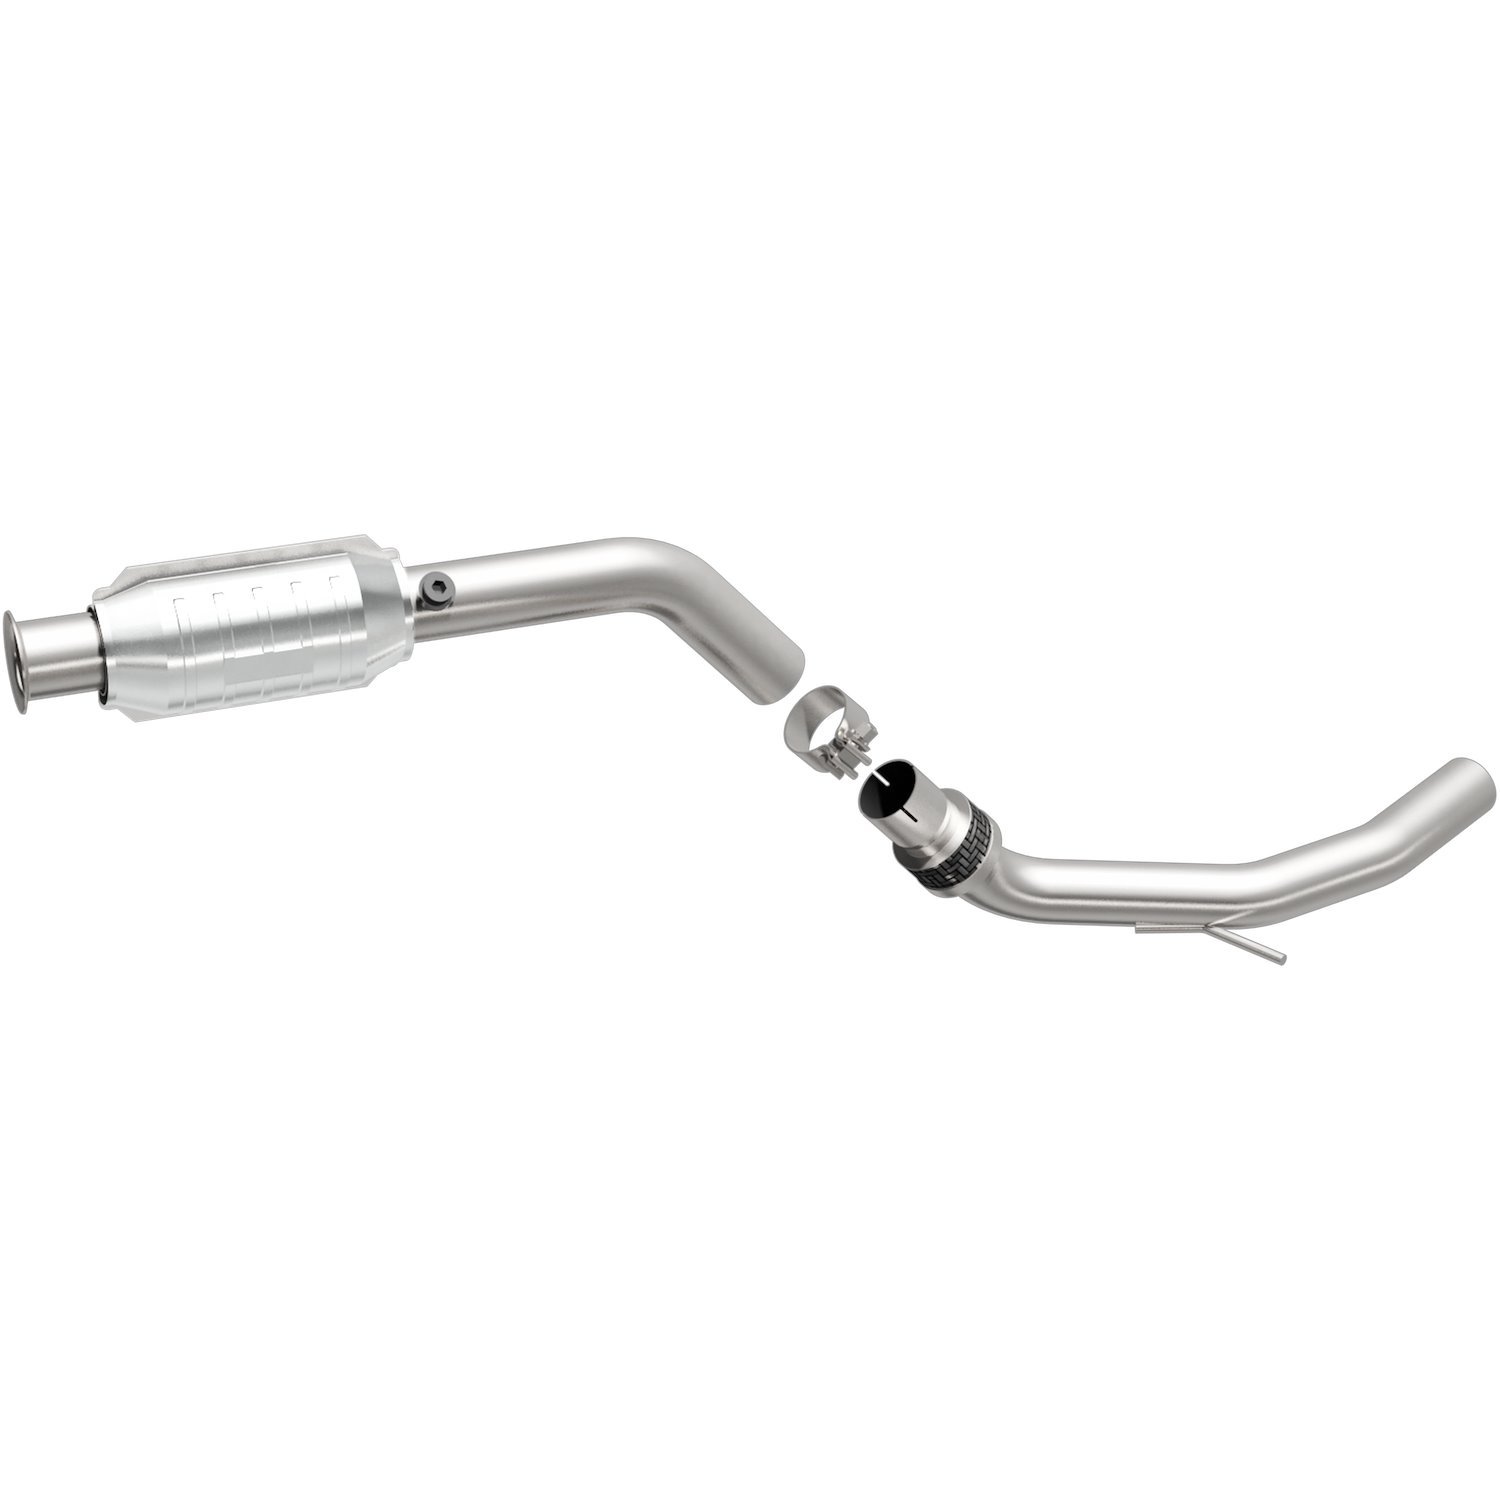 HM Grade Federal / EPA Compliant Direct-Fit Catalytic Converter 23257